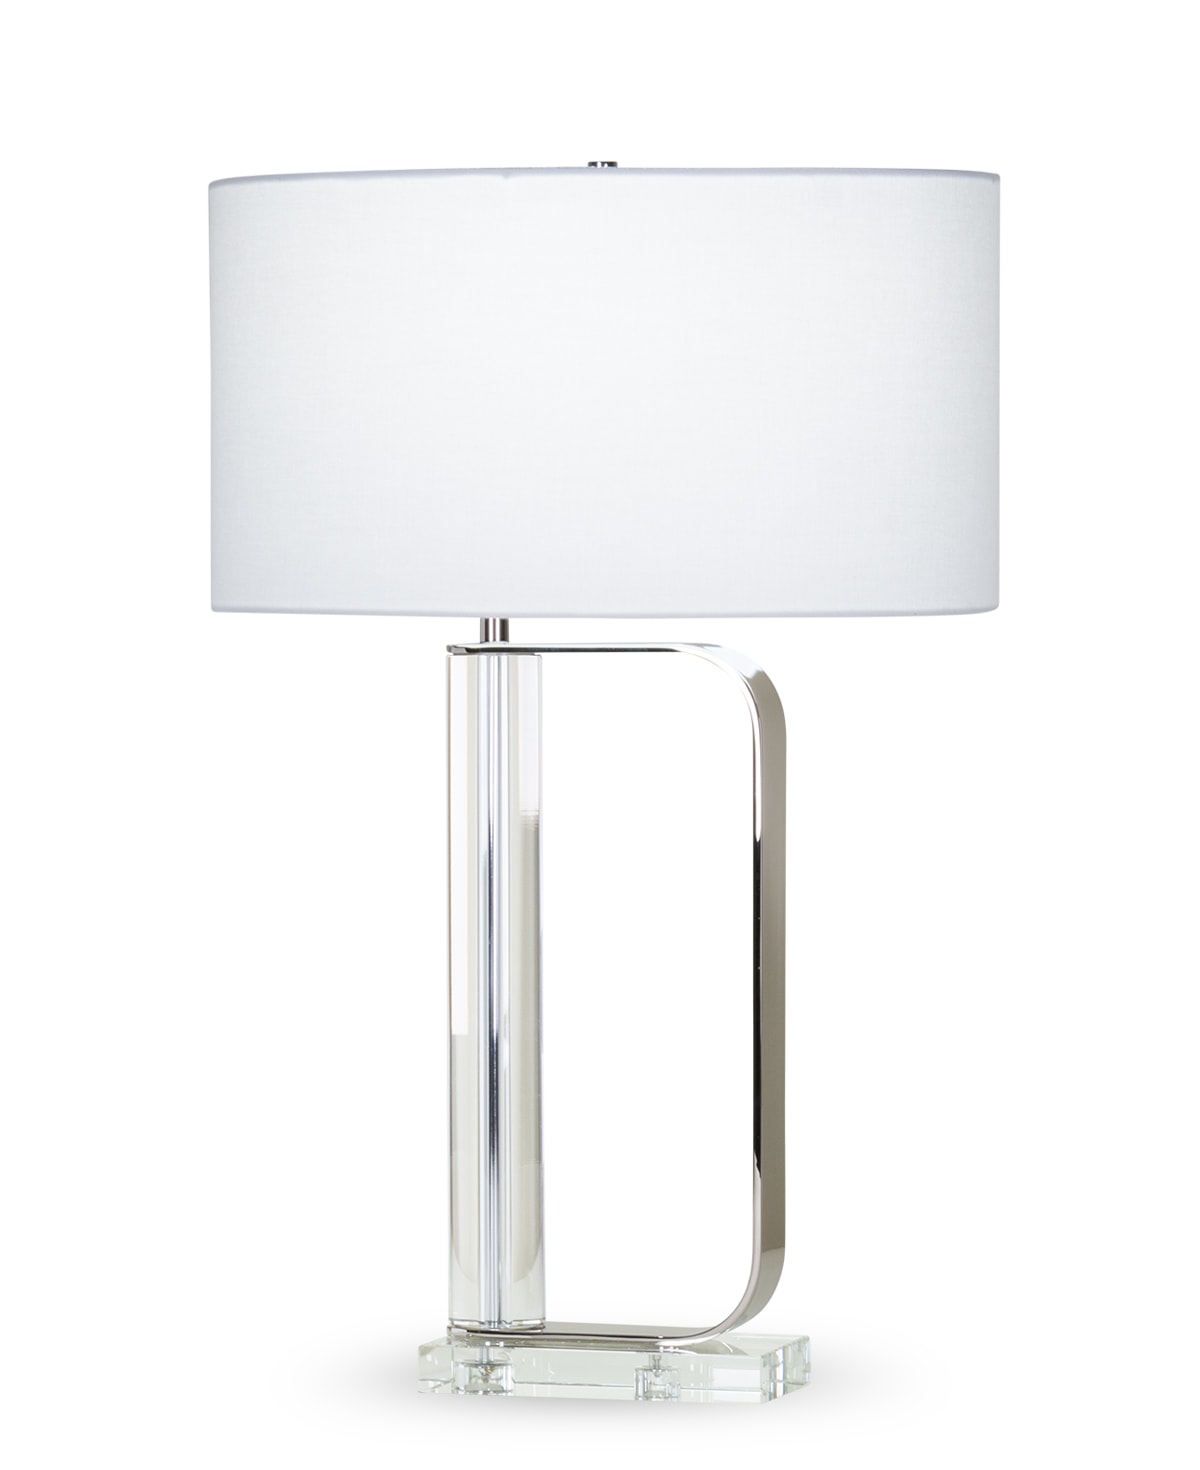 FlowDecor Donald Table Lamp in crystal and metal with polished nickel finish and white linen oval shade (# 4414)